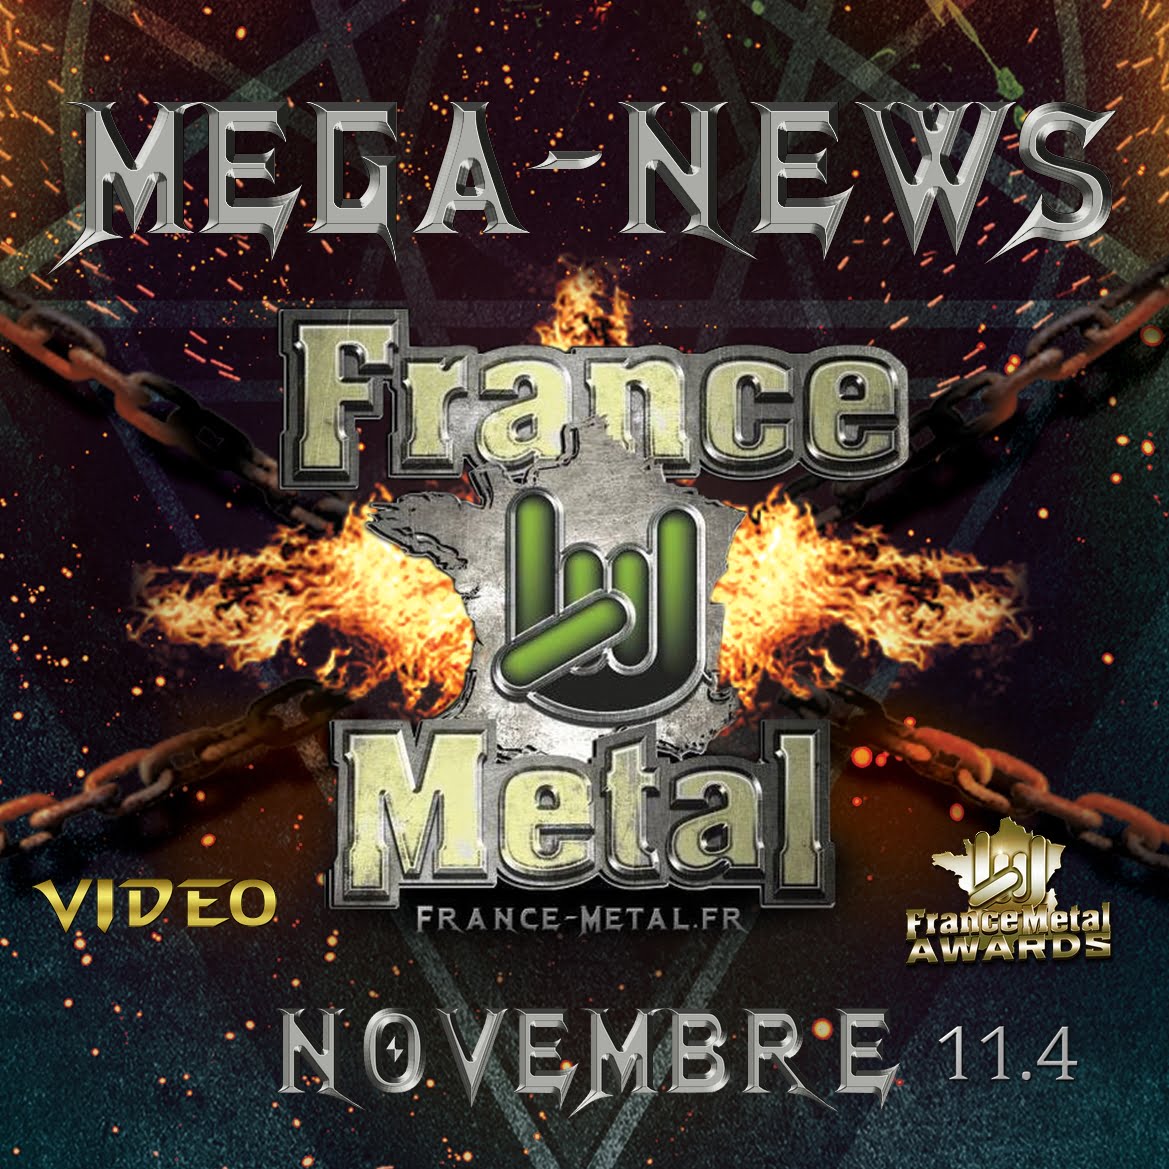 You are currently viewing MEGA-NEWS – Novembre 2020 – Video 11.4